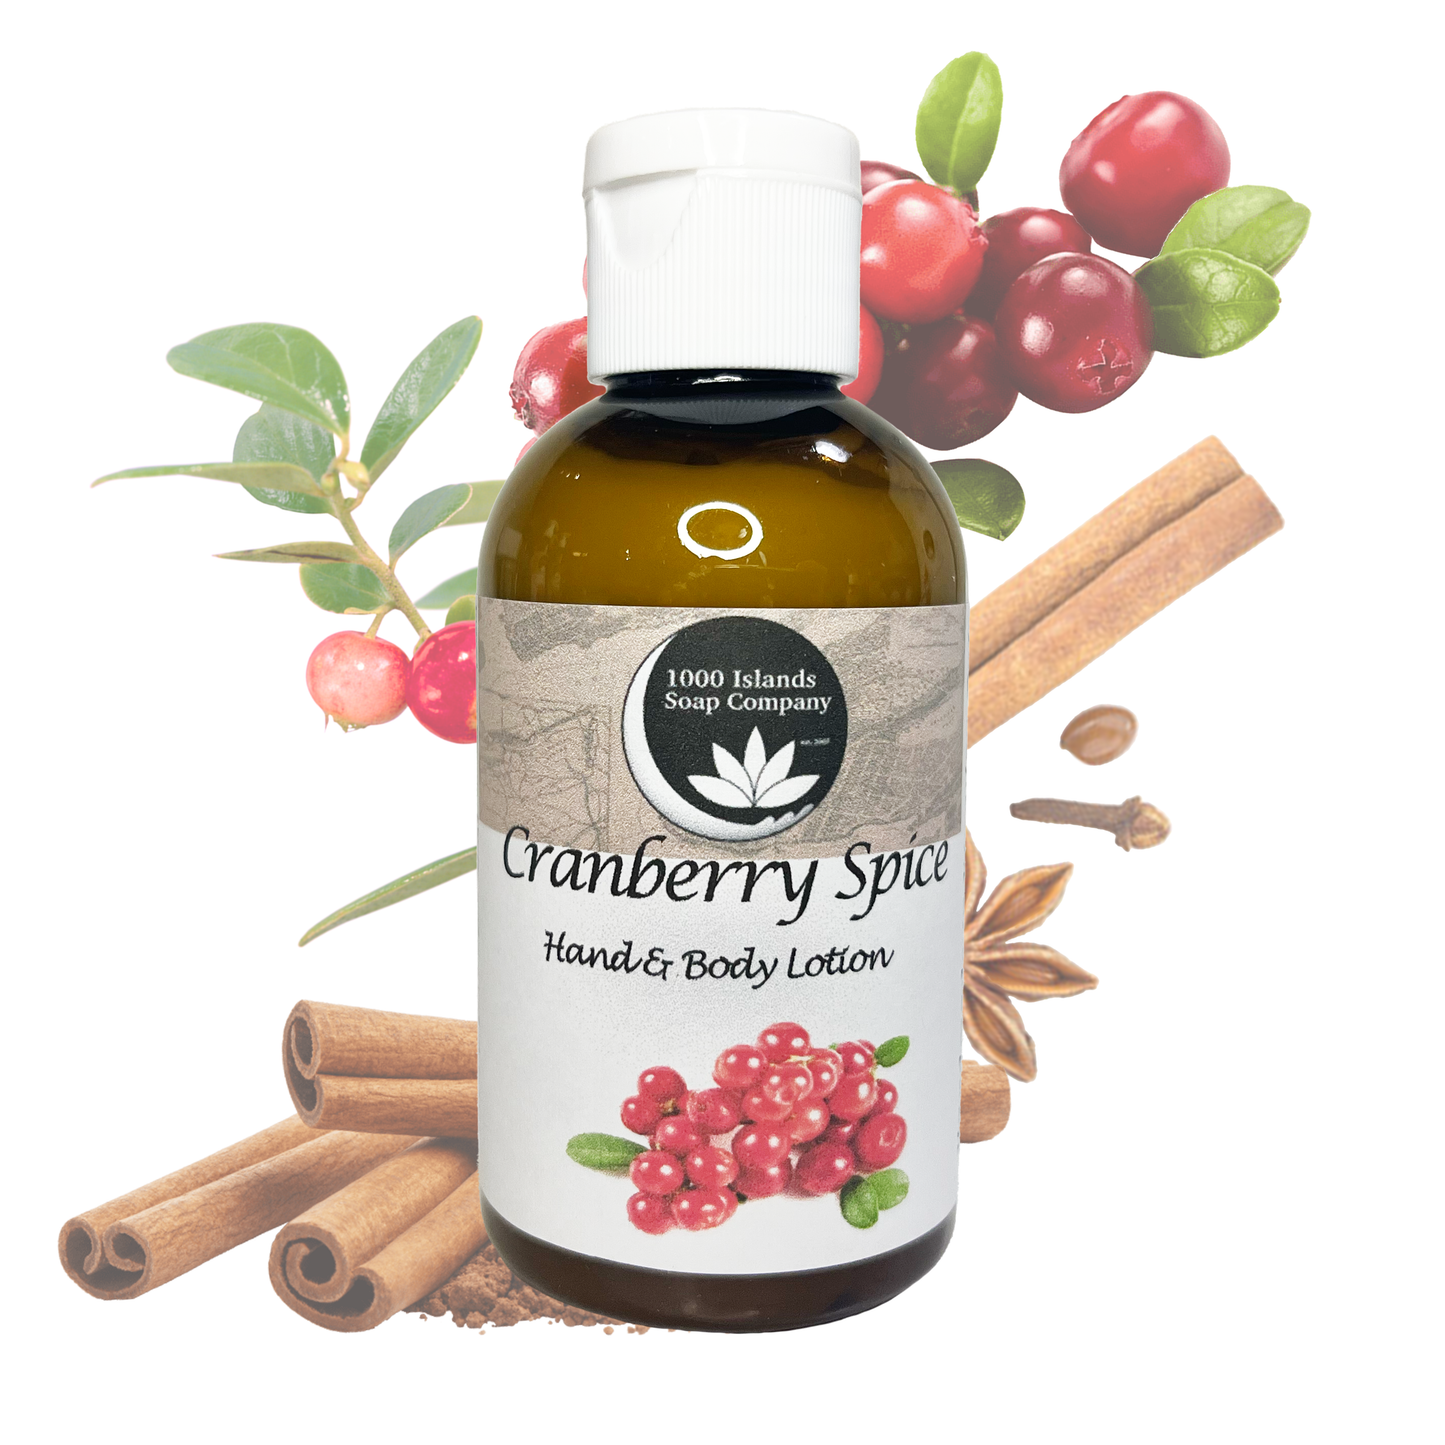 Cranberry Spice Hand & Body Lotion